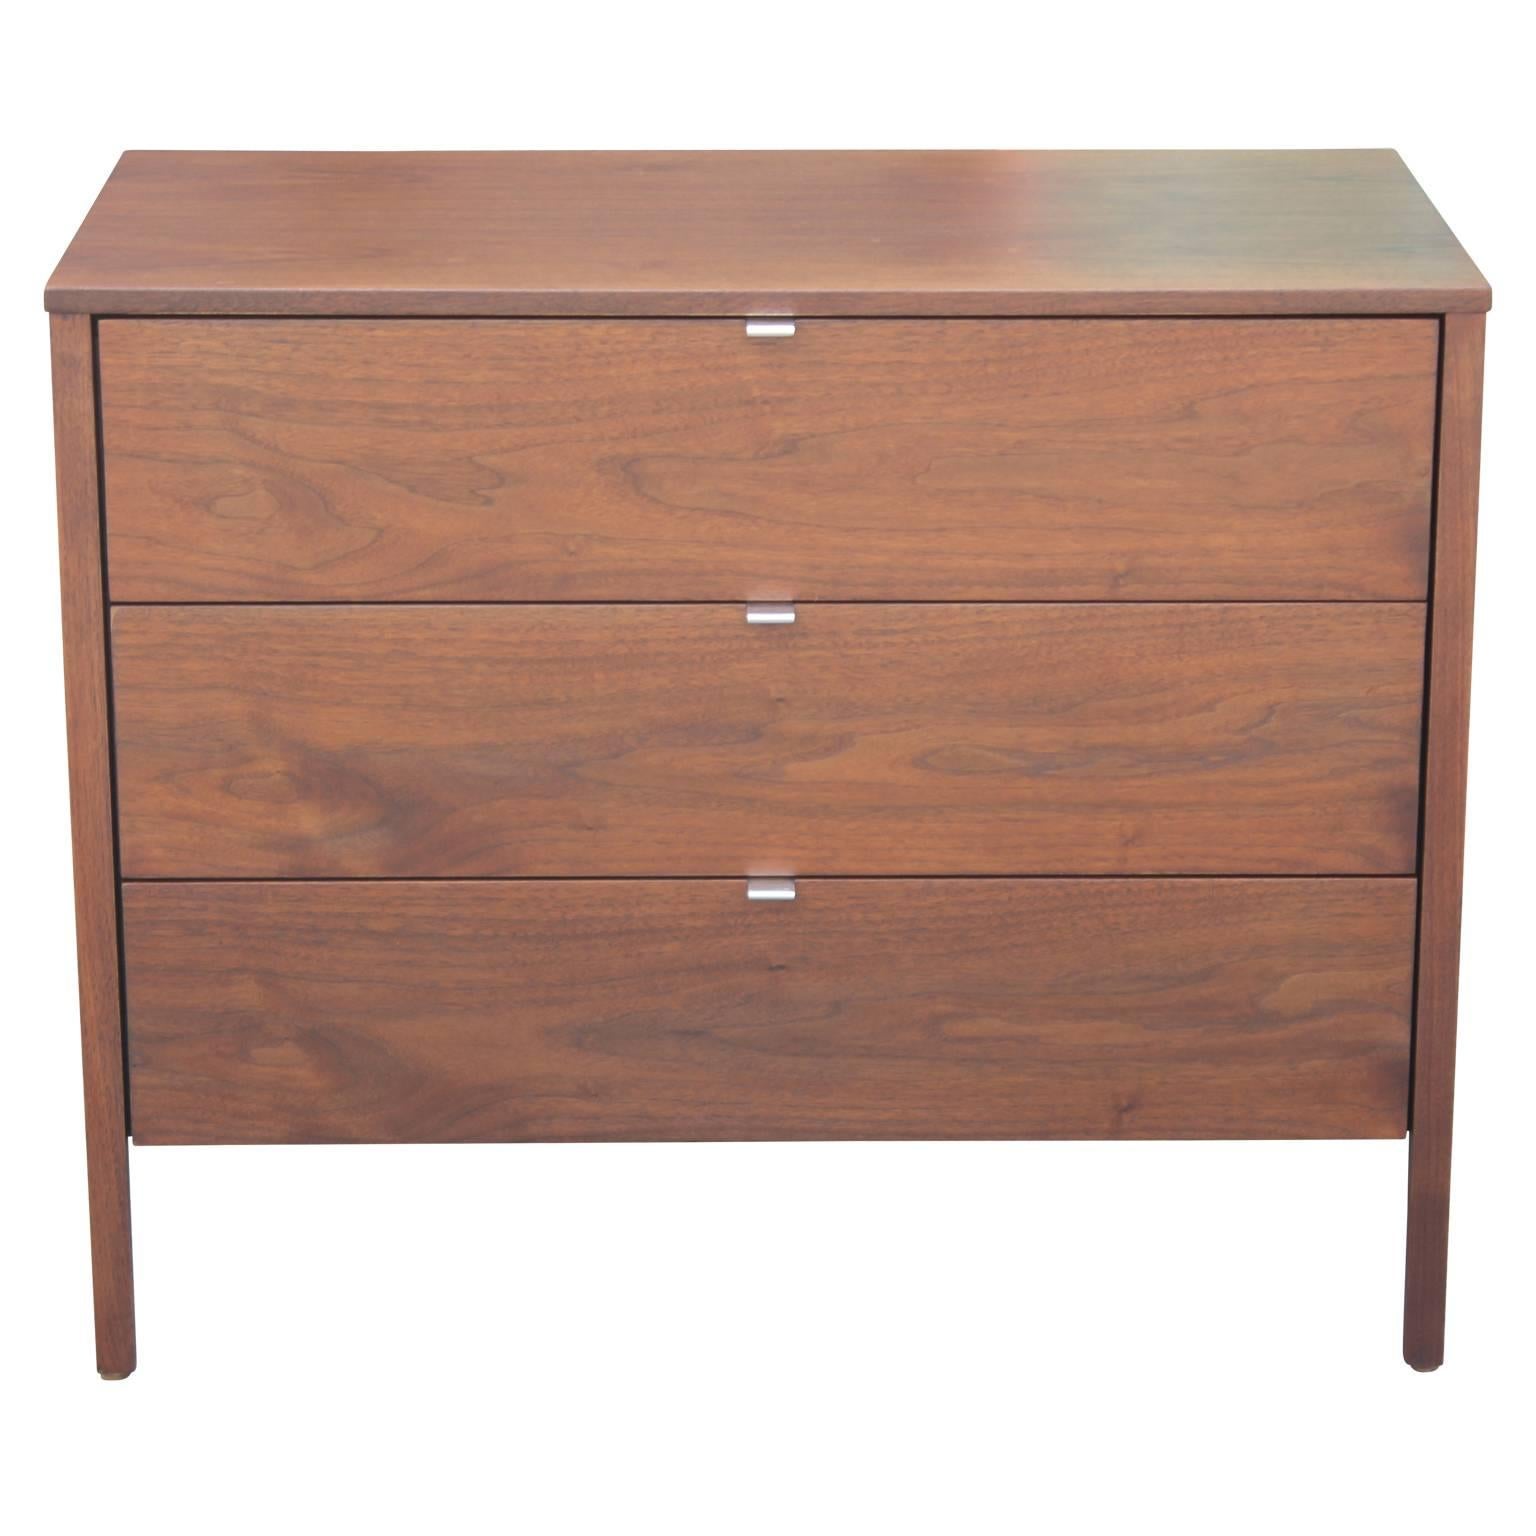 Pair of Mid-Century Modern clean-lined walnut Bachelor's chests by Knoll. Freshly refinished. One chest contains four drawers while the other contains three drawers.